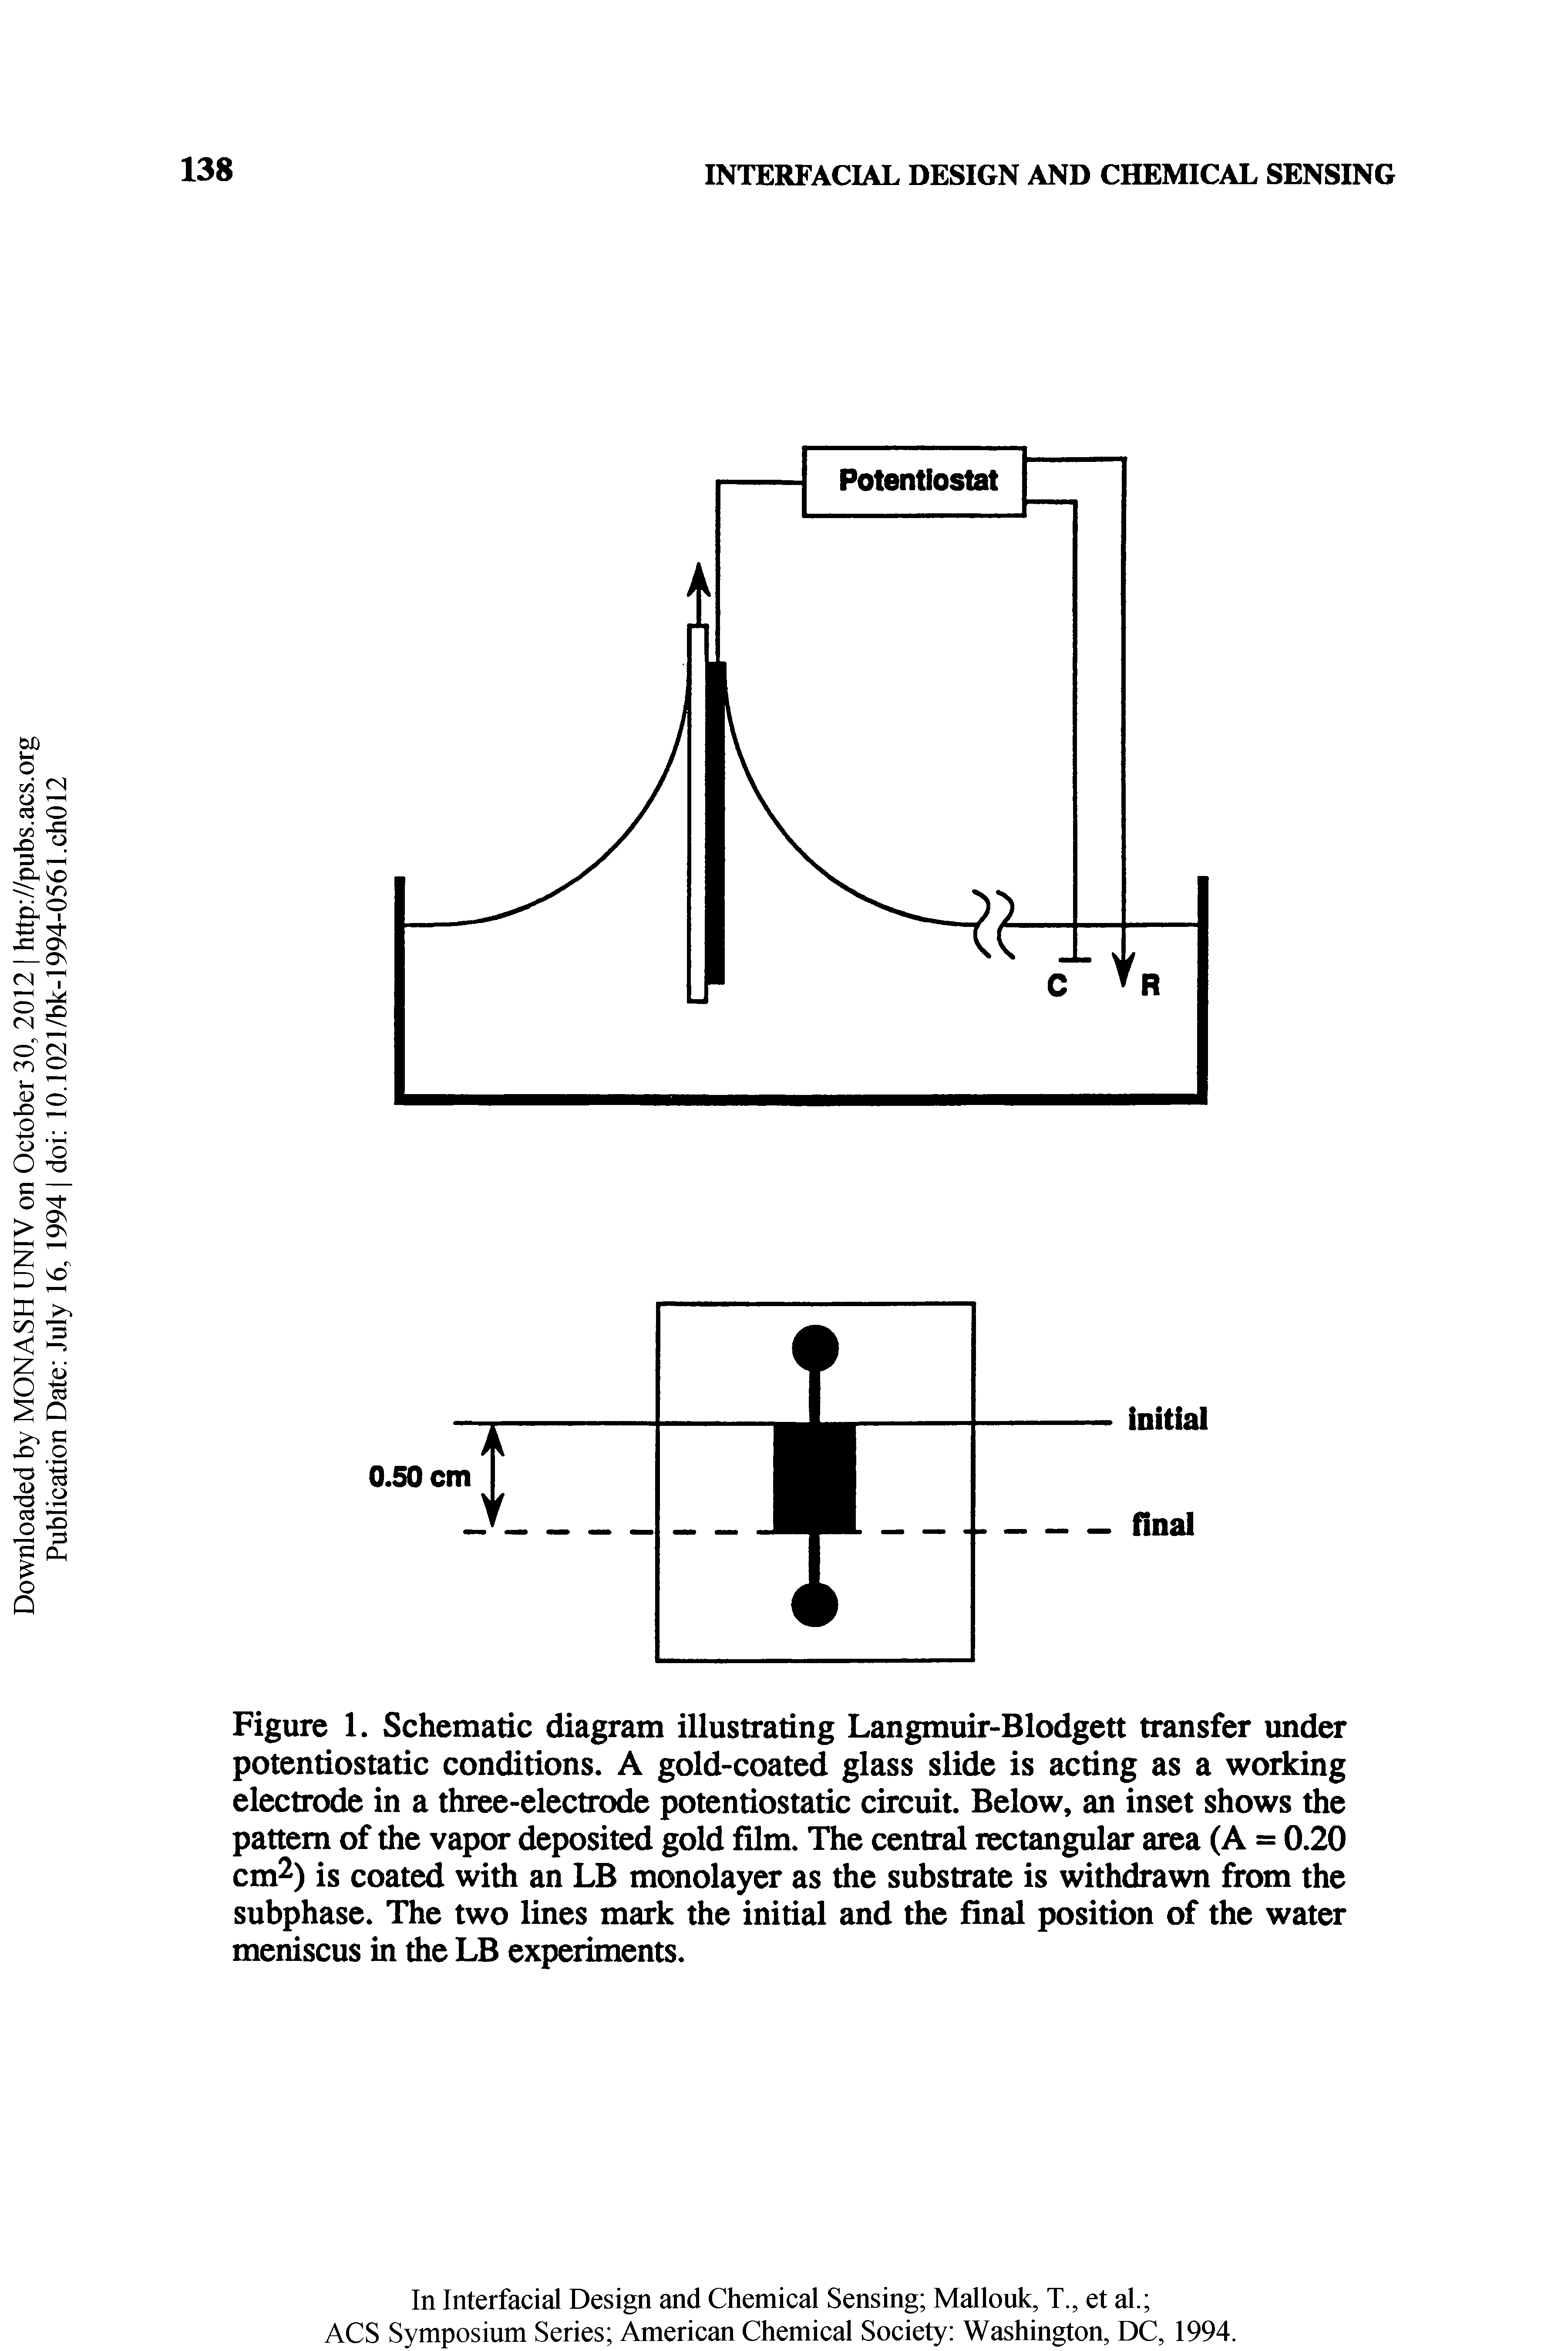 Figure 1. Schematic diagram illustrating Langmuir-Blodgett transfer under potentiostatic conditions. A gold-coated glass slide is acting as a working electrode in a three-electrode potentiostatic circuit. Below, an inset shows the pattern of the vapor deposited gold film. The central rectangular area (A = 0.20 cm ) is coated with an LB monolayer as the substrate is withdrawn from the subphase. The two lines mark the initial and the final position of the water meniscus in the LB experiments.